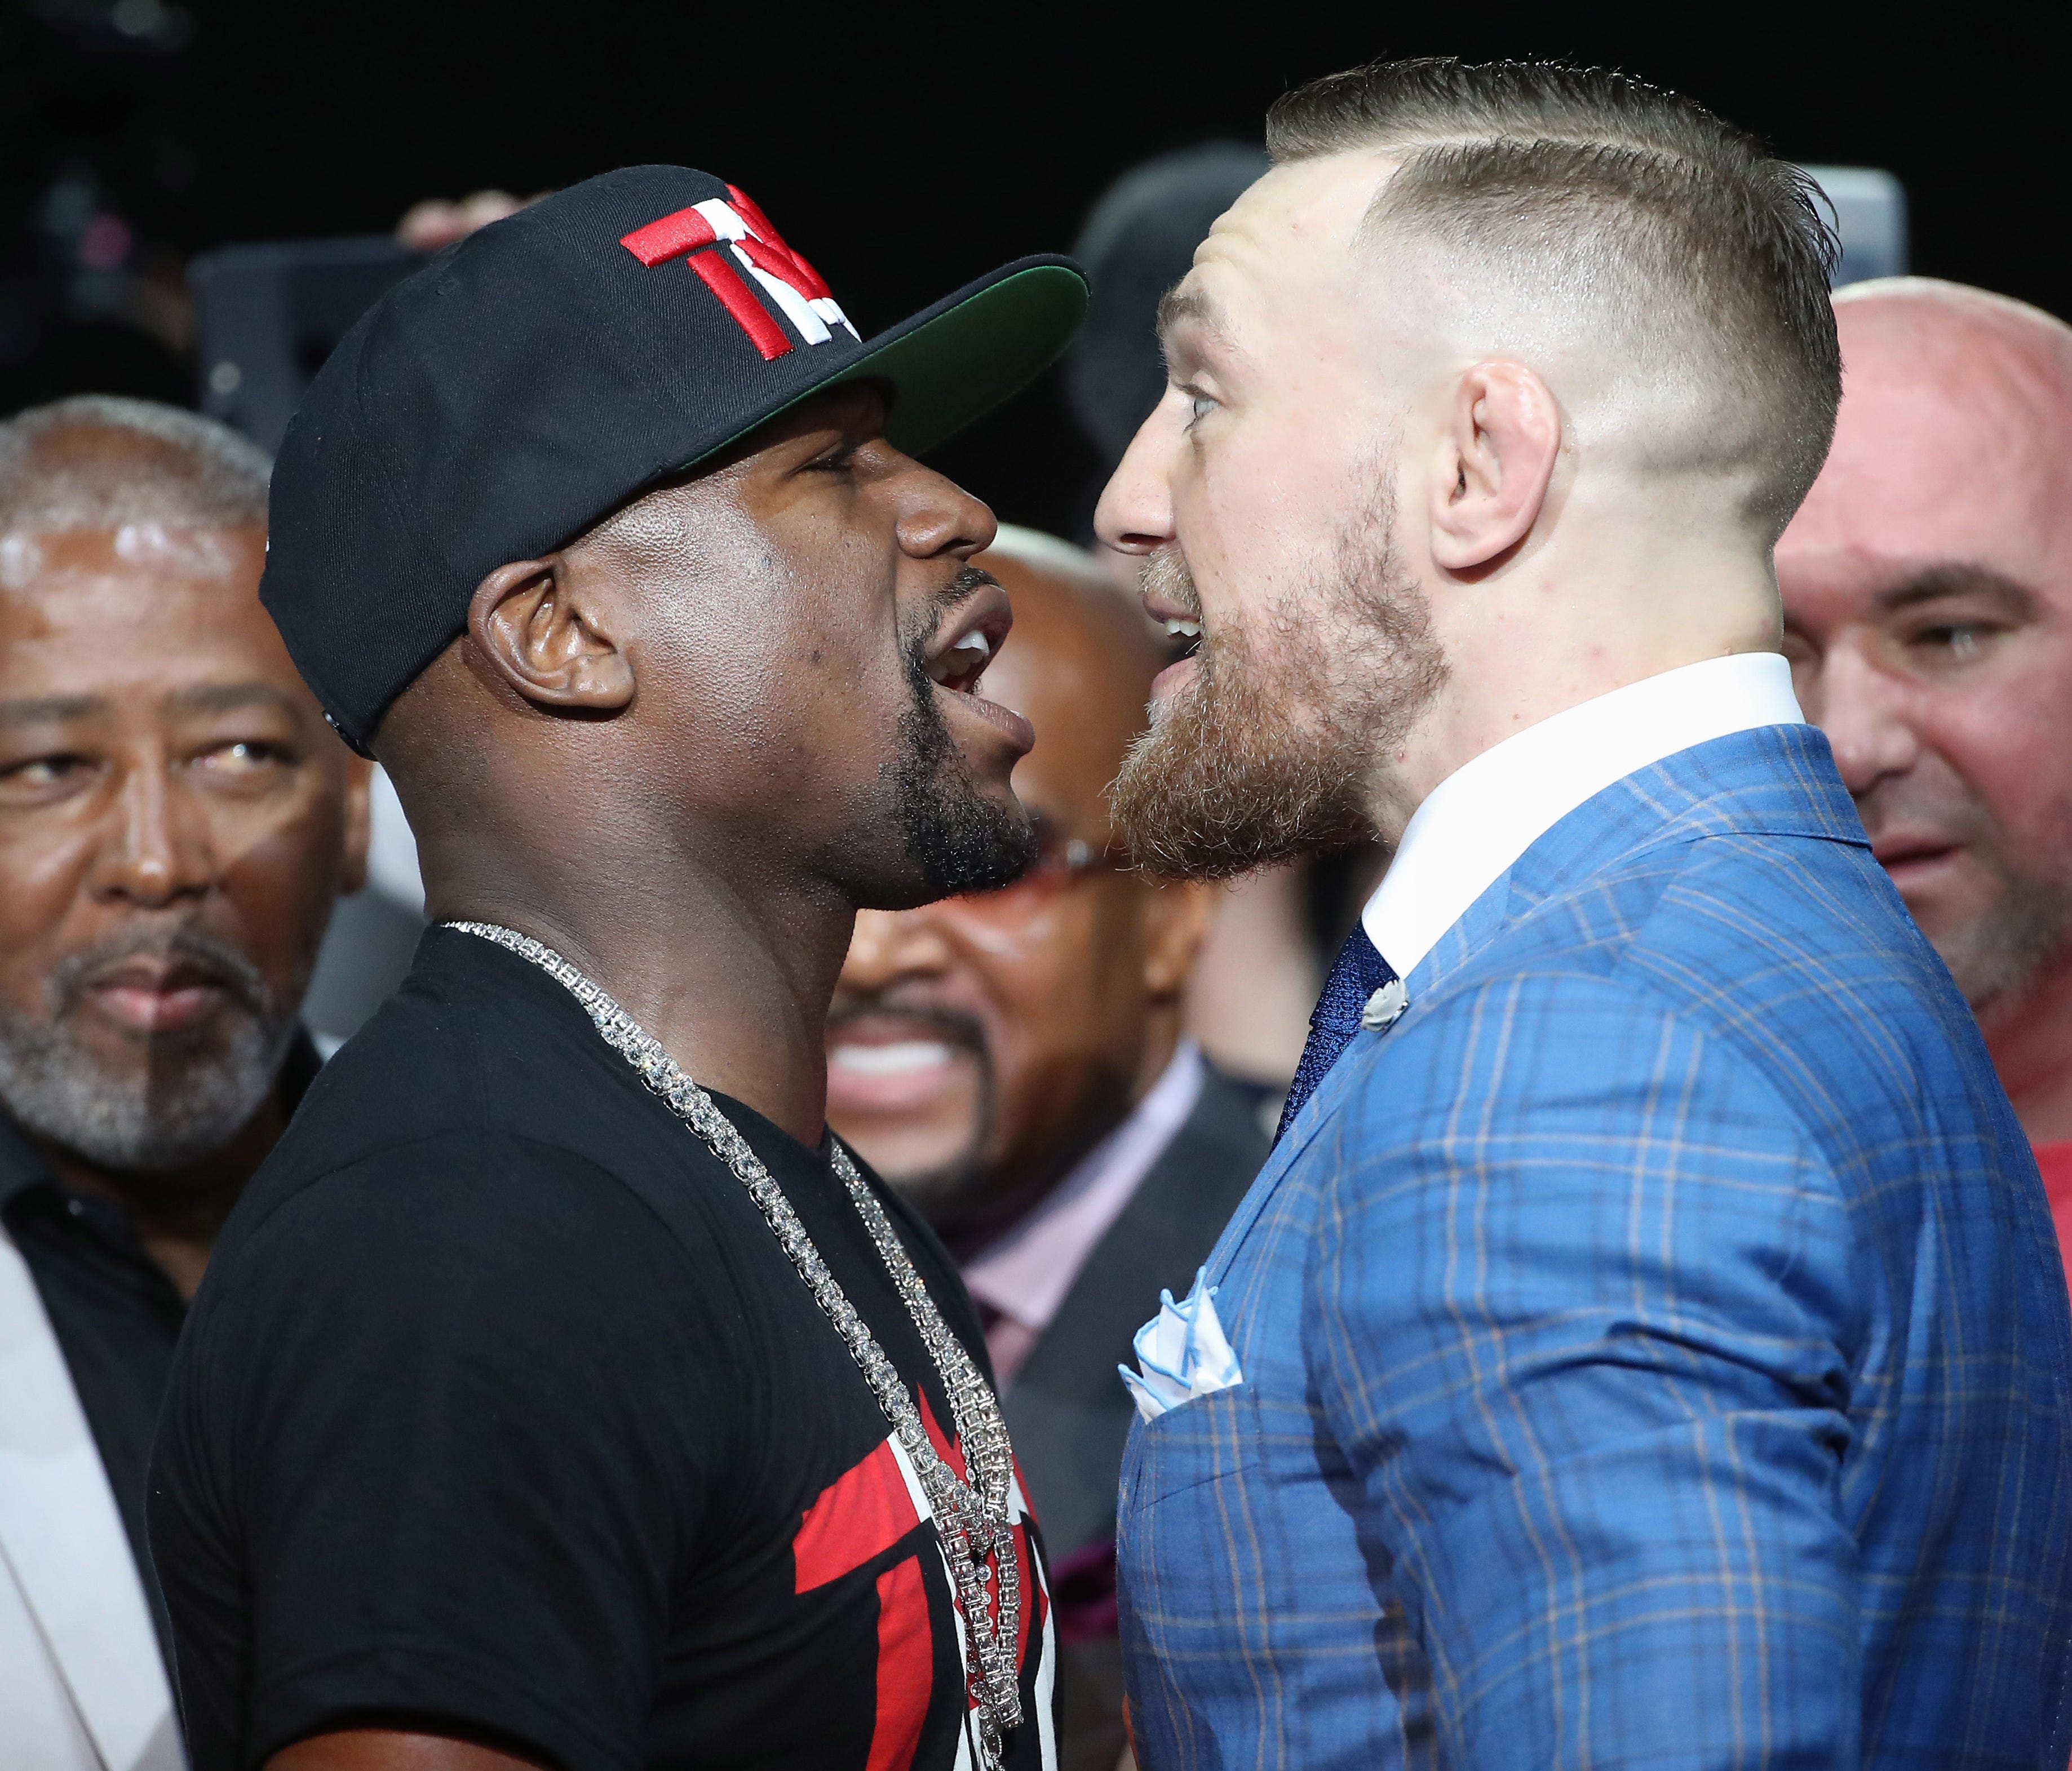 Floyd Mayweather and Conor McGregor stare each other down during a world tour press conference.